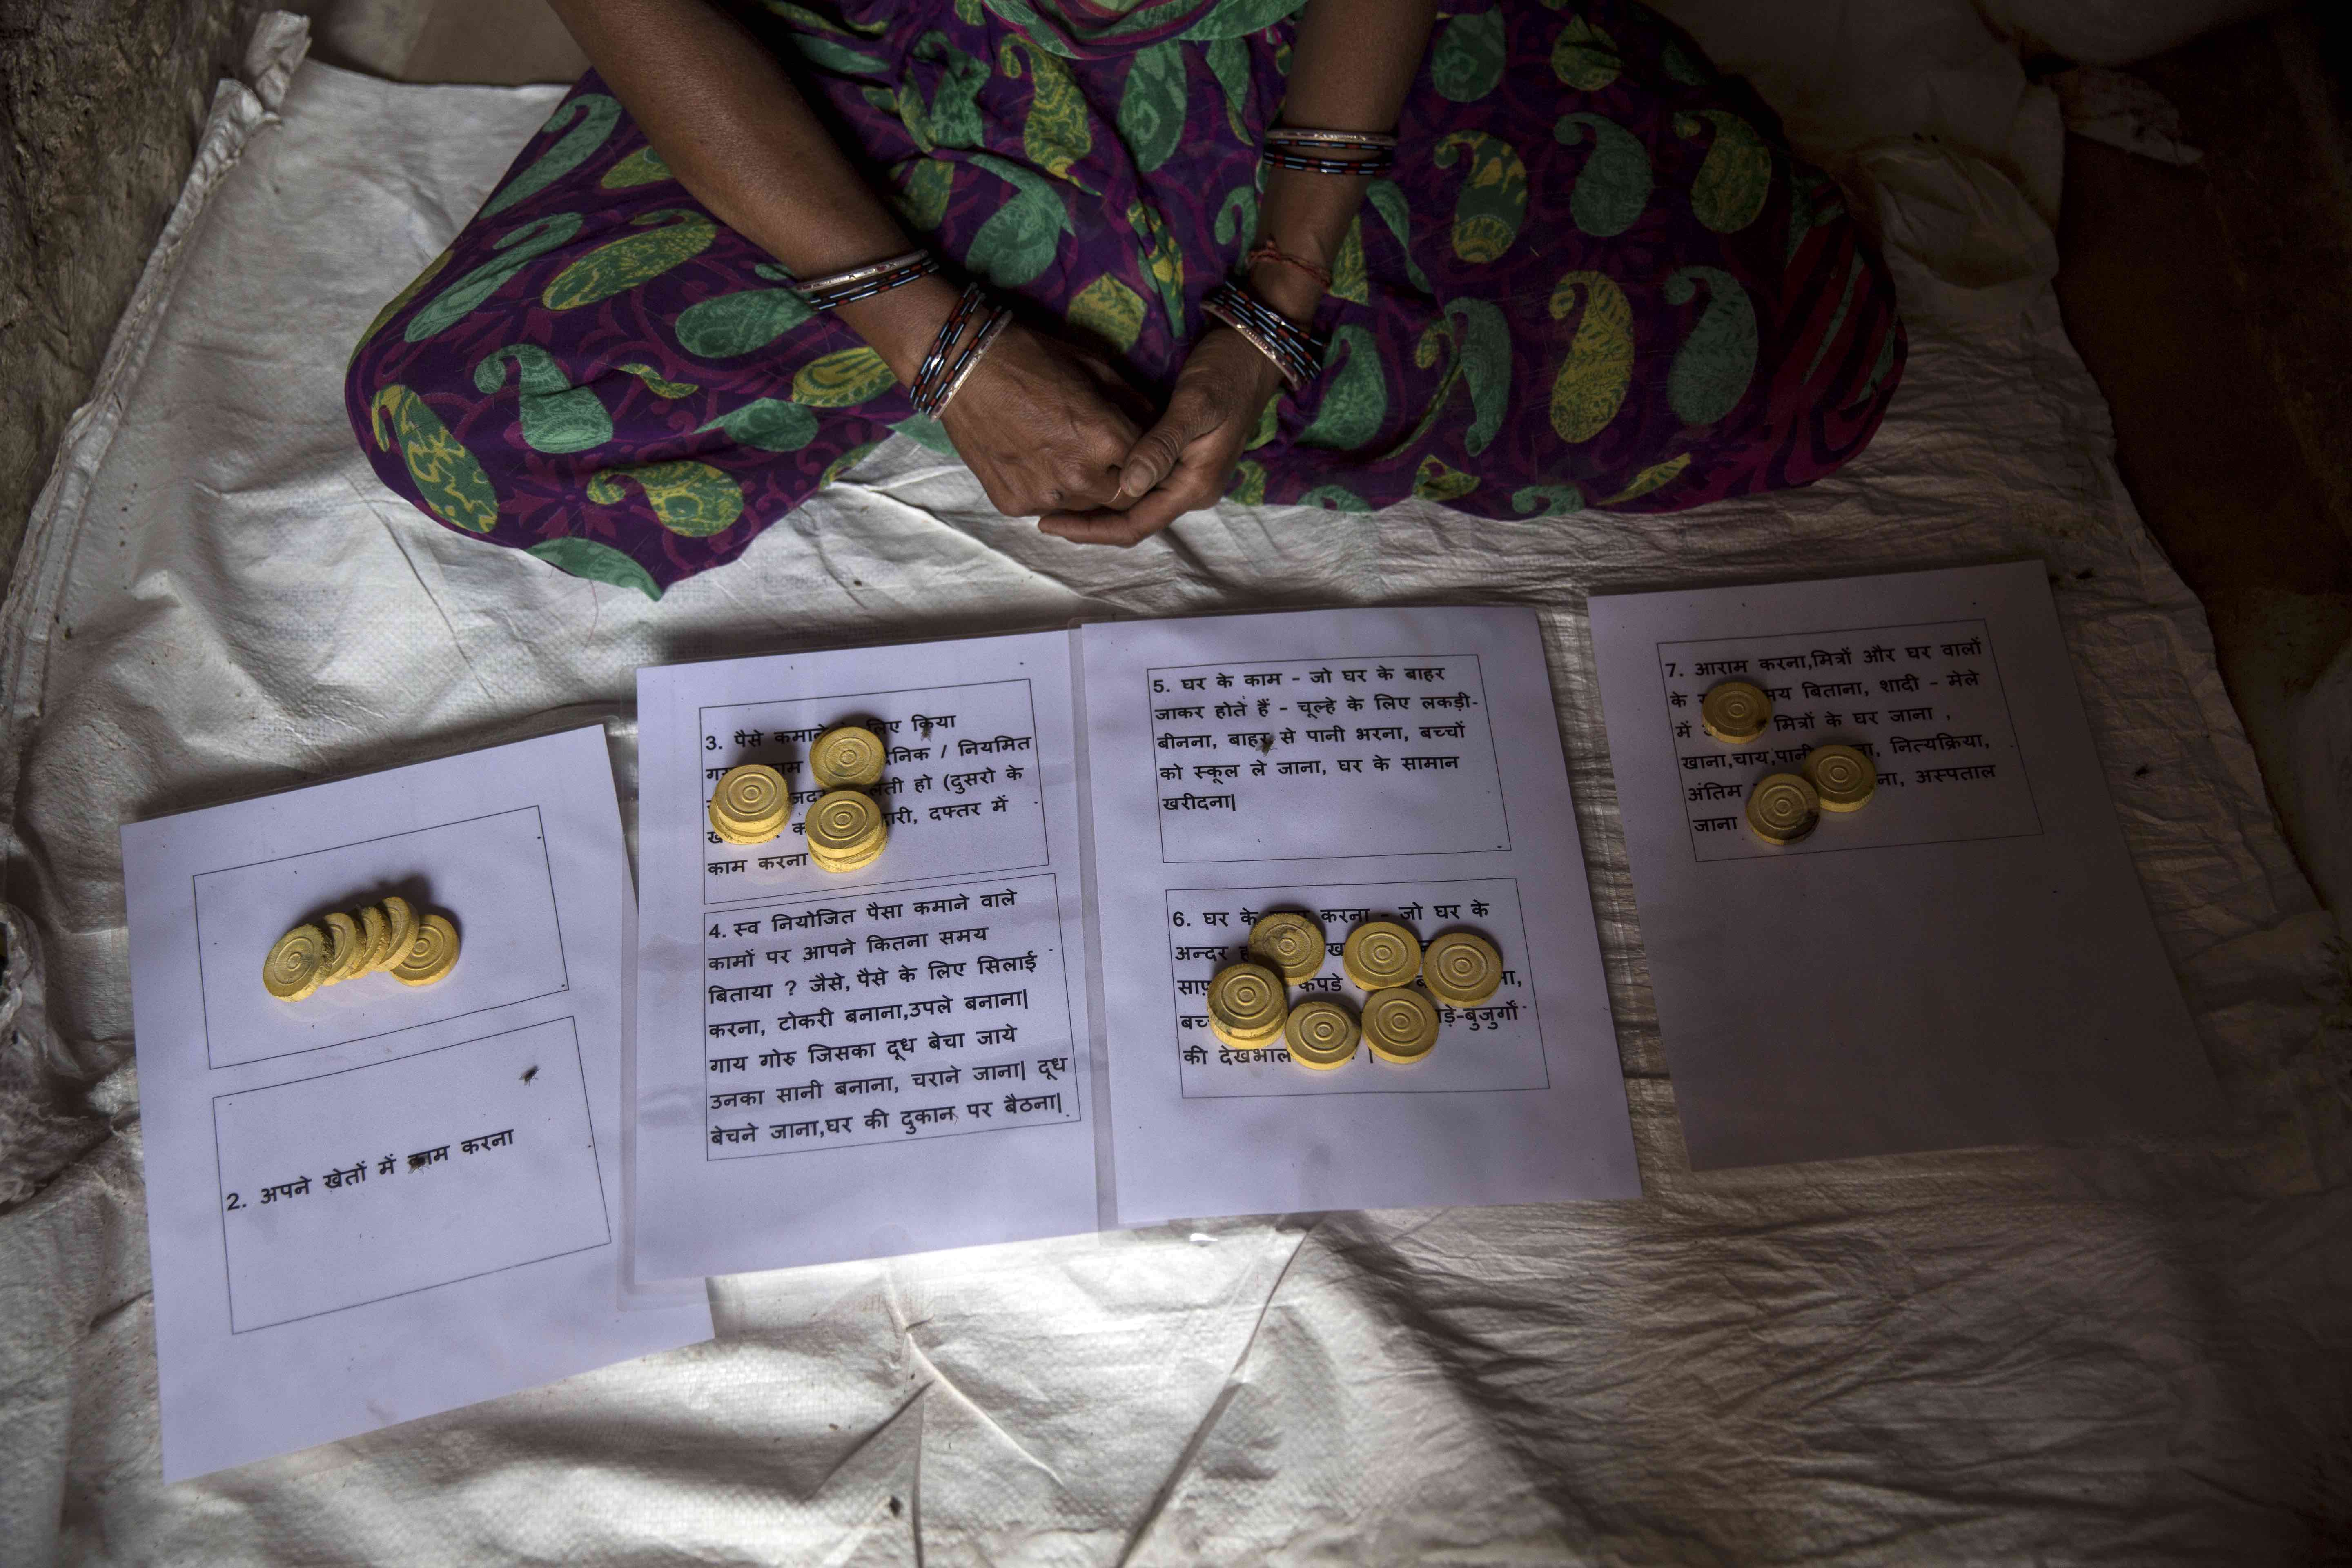 A woman survey respondent places coins onto a mat with separate boxes for anwers.